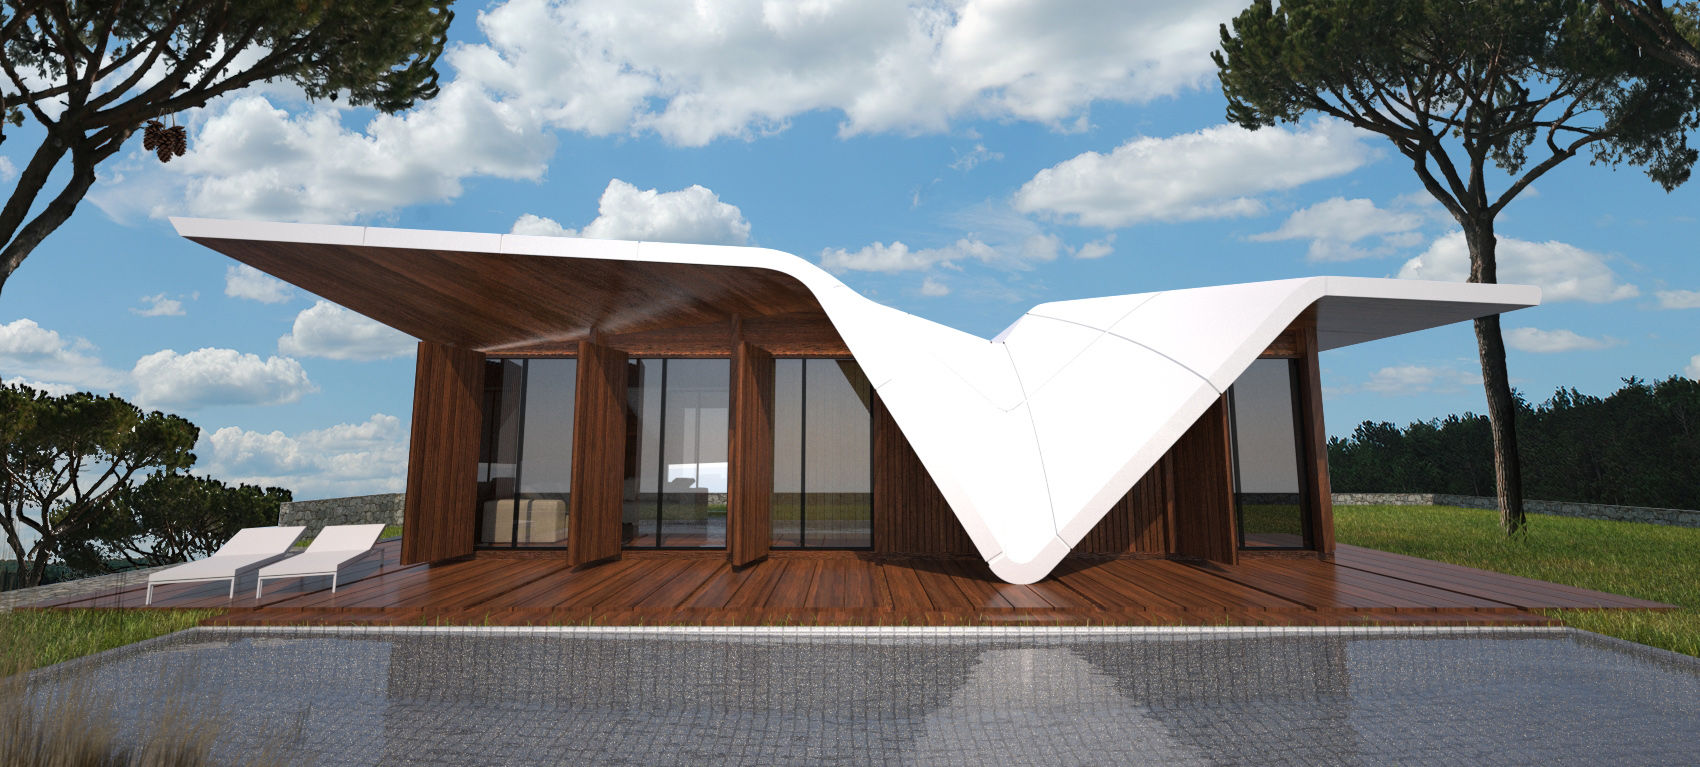 Temporary Wings, Office of Feeling Architecture, Lda Office of Feeling Architecture, Lda منازل